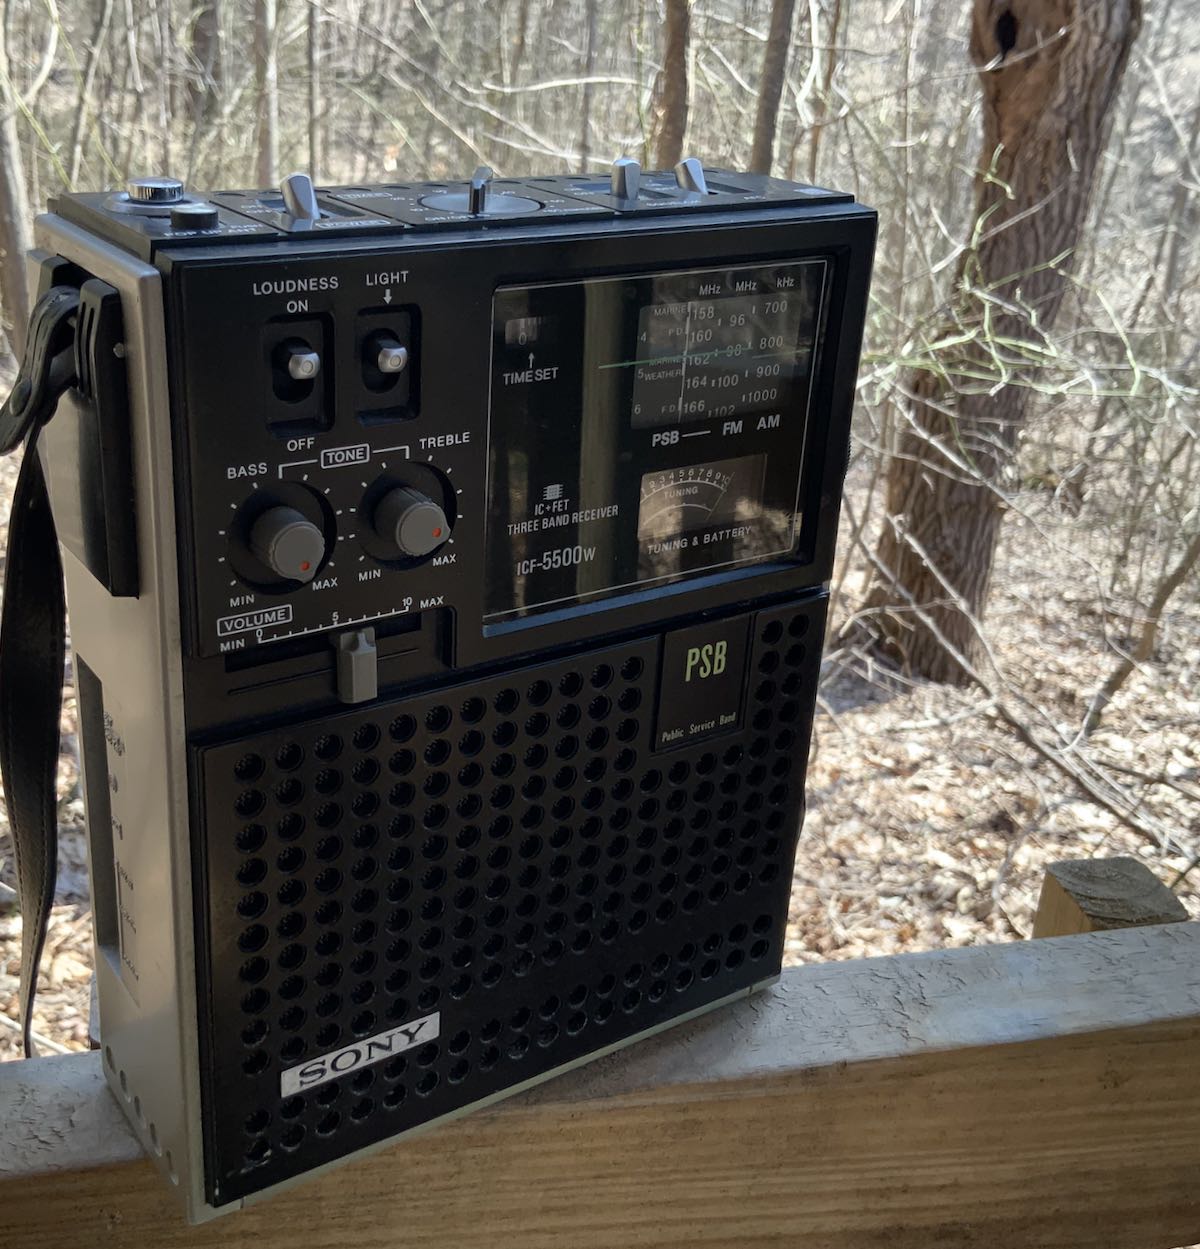 Sony ICF-860 AM FM TV Band Portable Radio Review 